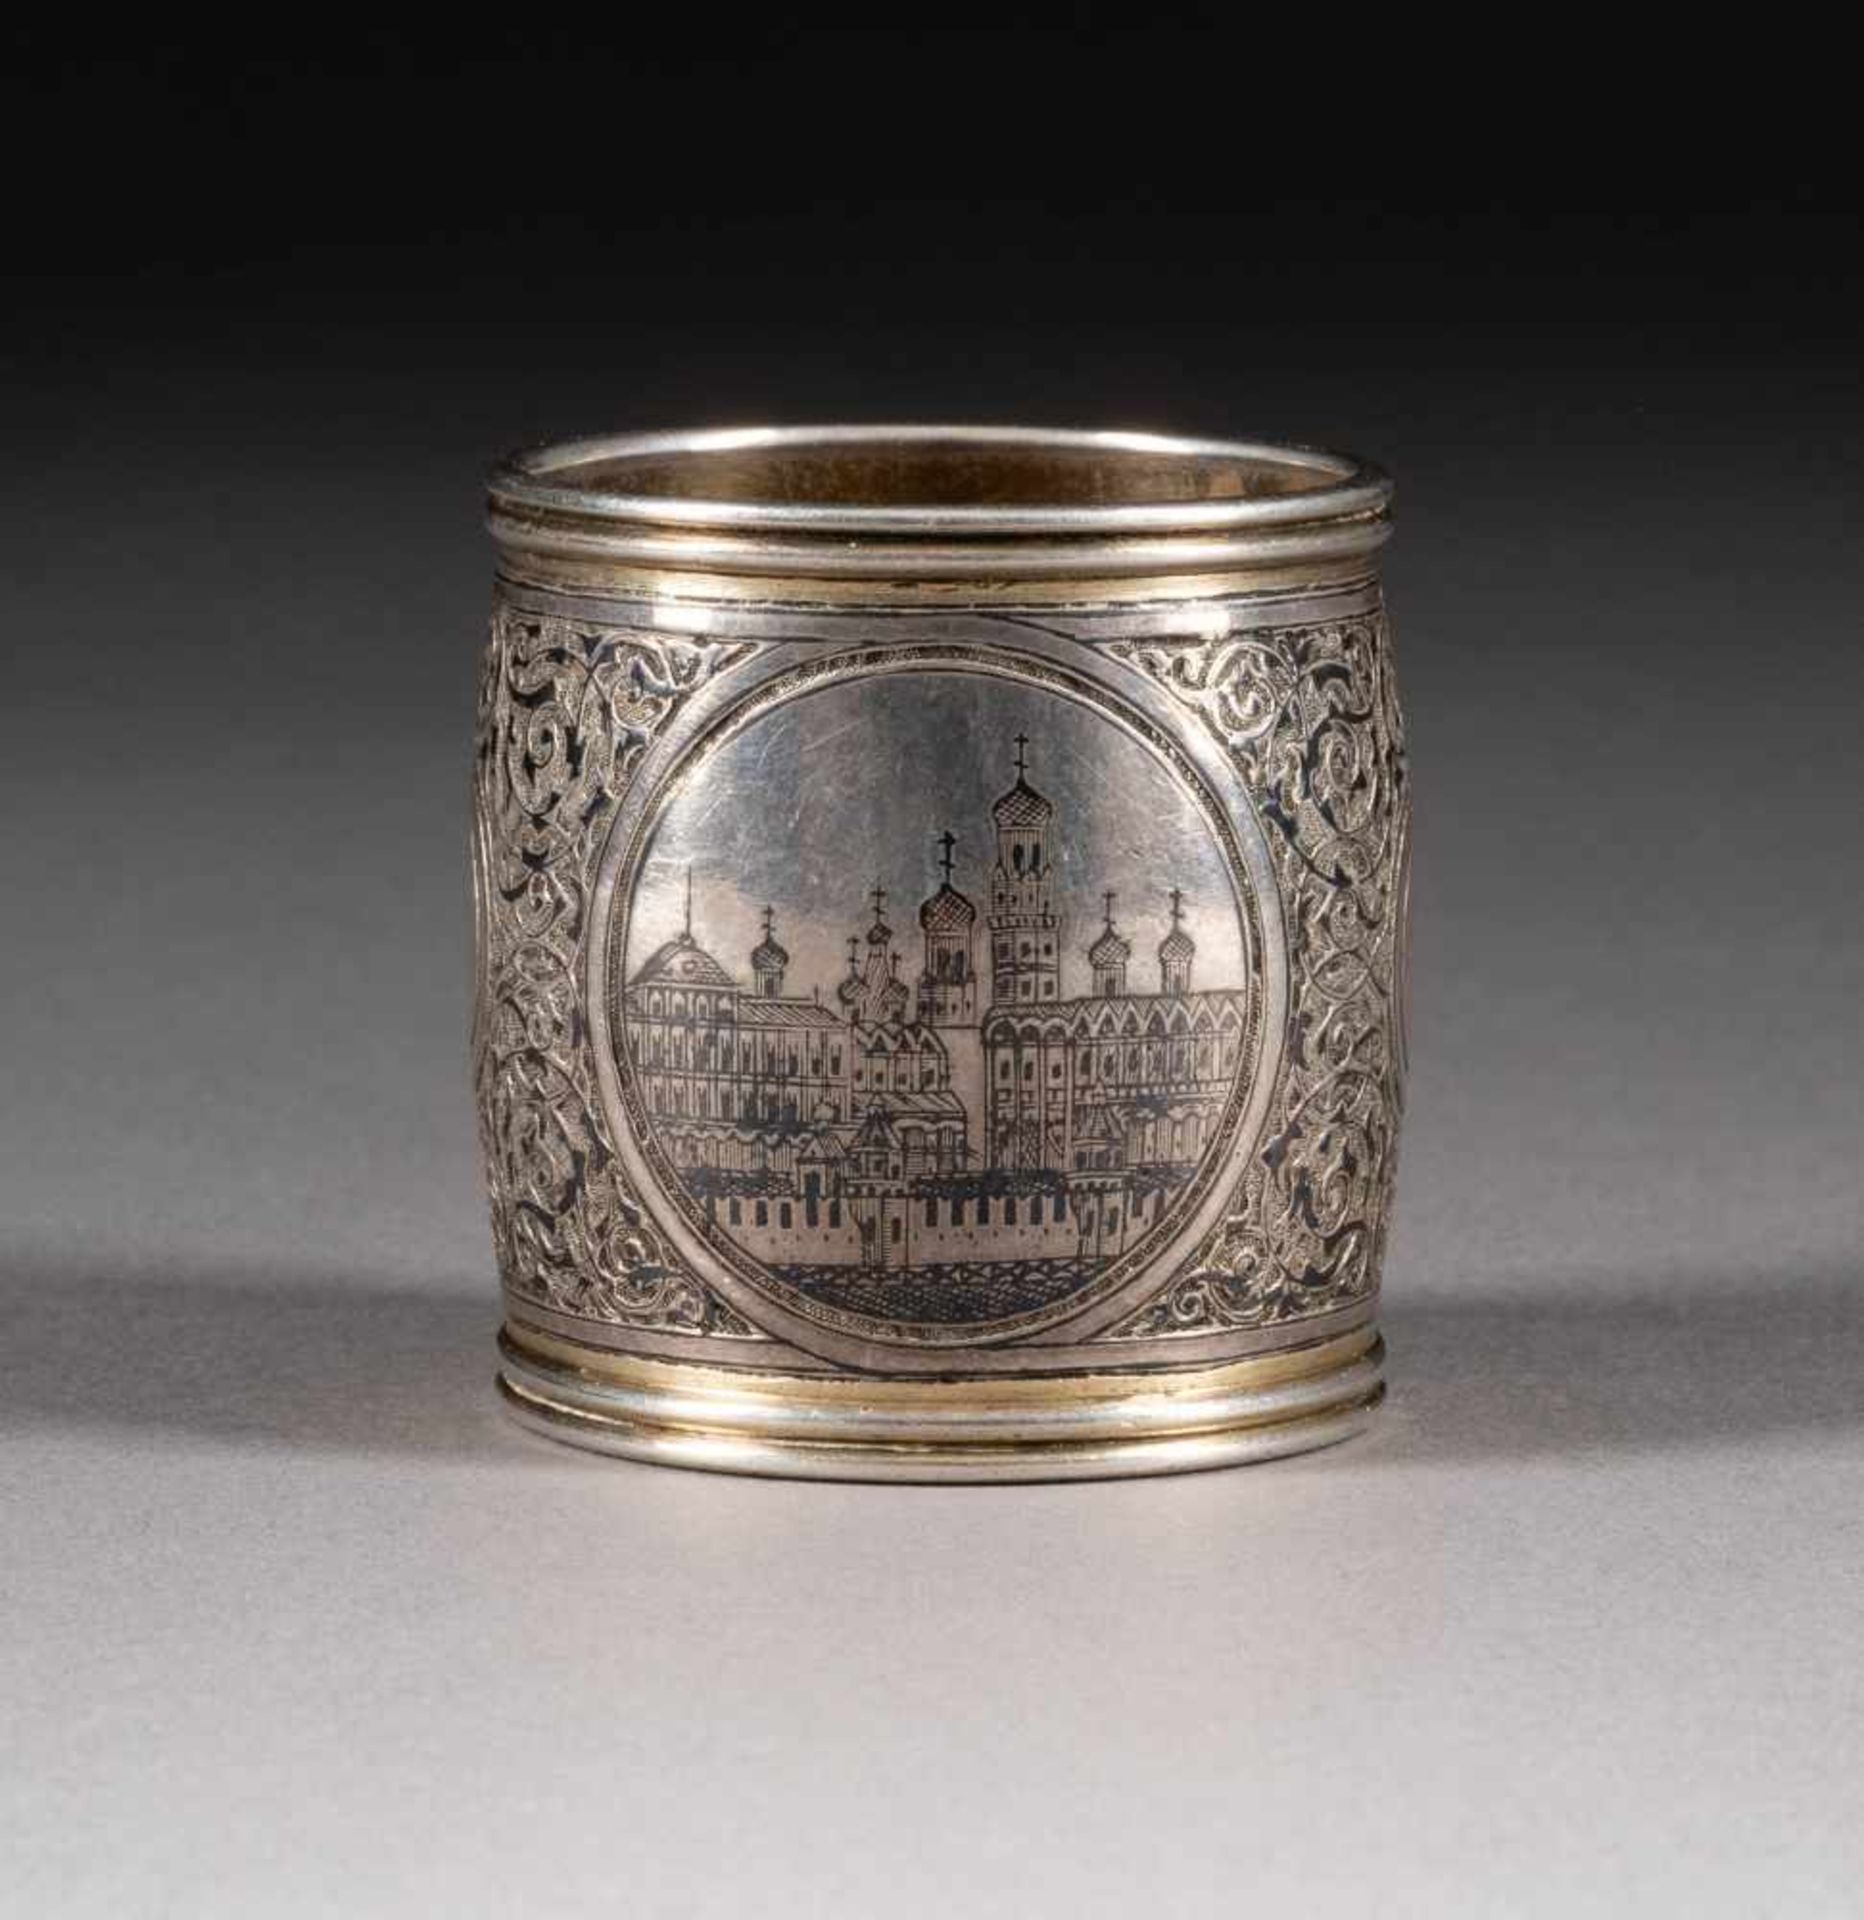 A SILVER AND NIELLO NAPKIN HOLDER WITH ARCHITECTURAL VIEWS OF MOSCOW